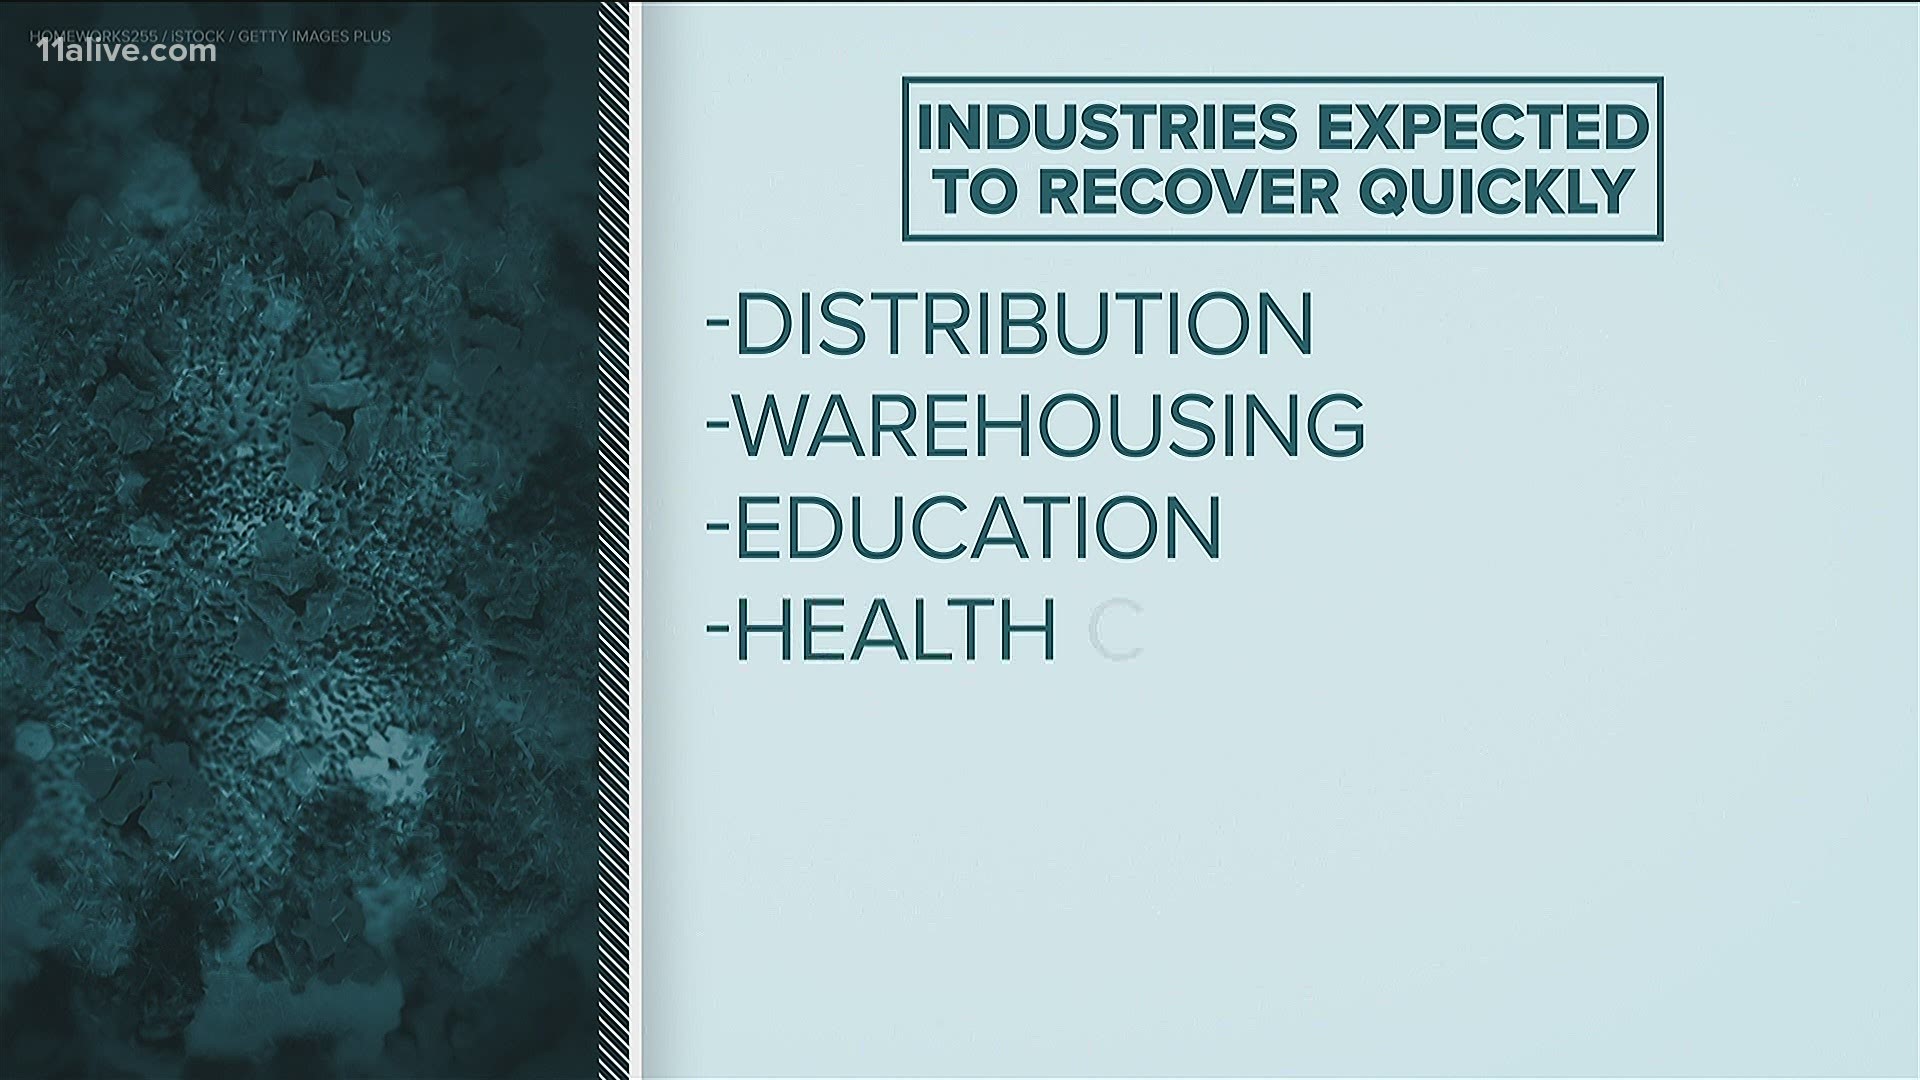 Here's a look at some of the industries expected to recover.